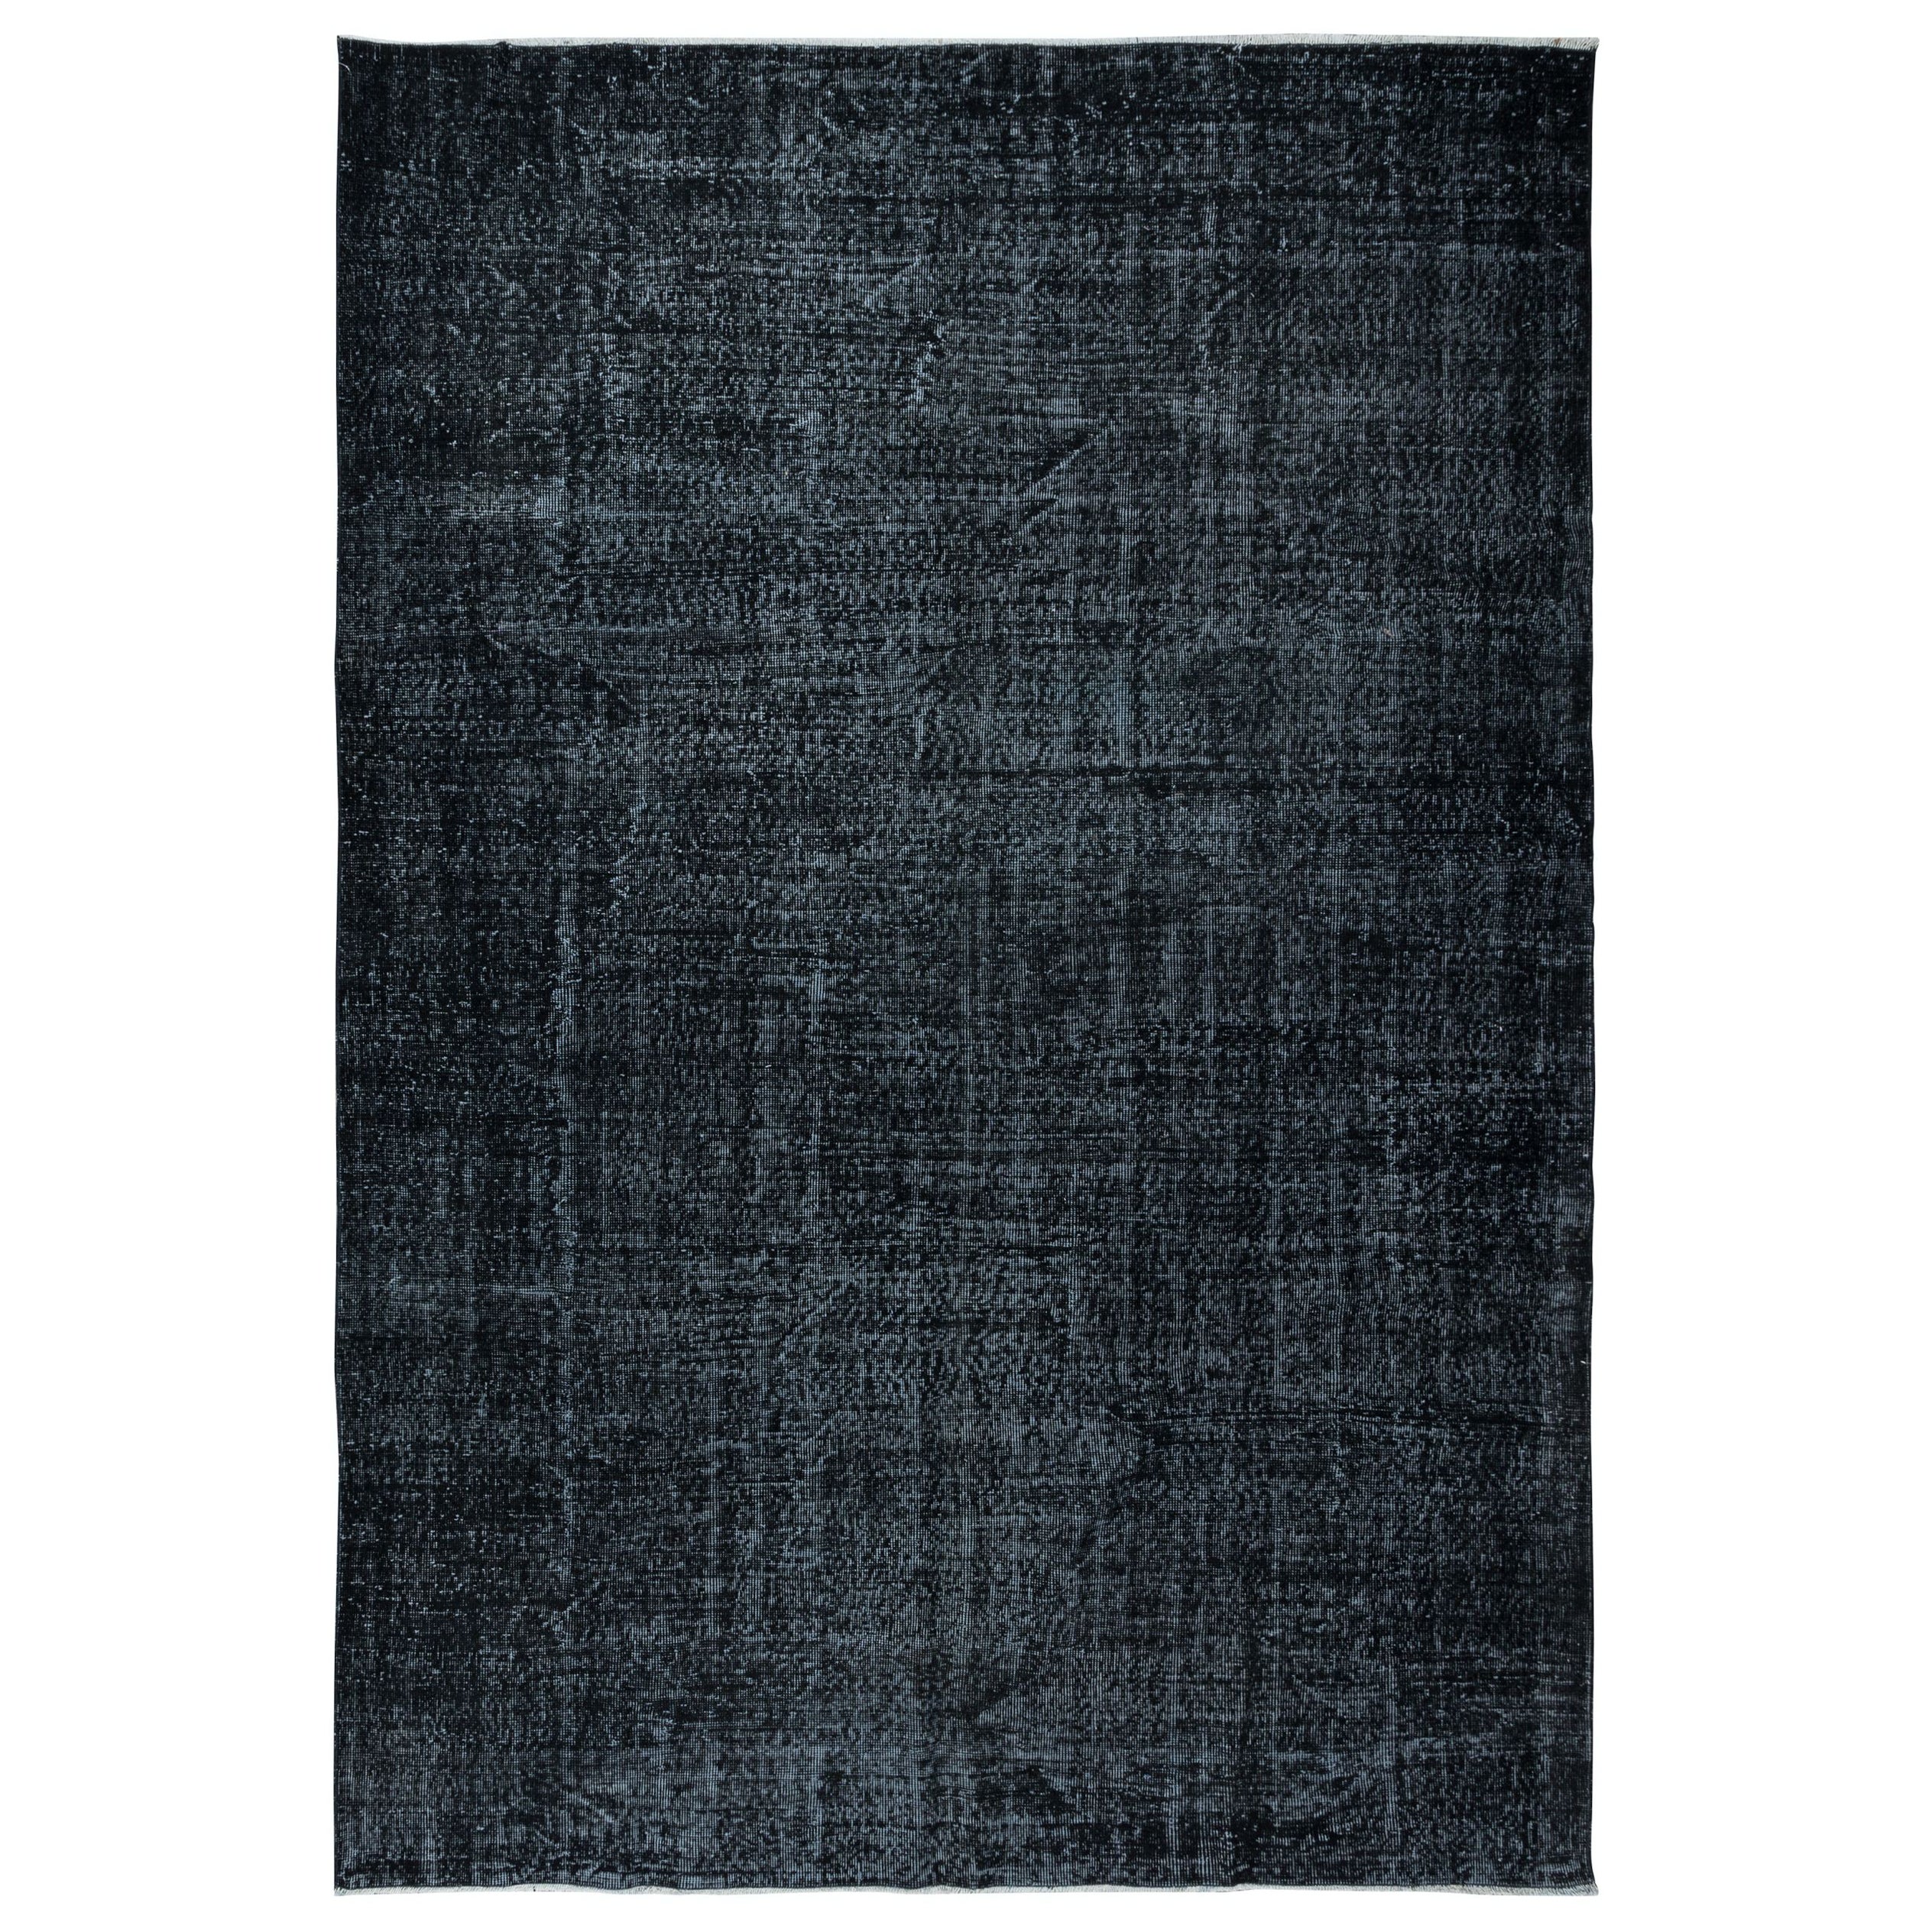 7x10.2 Ft Modern Black Area Rug, Handwoven and Handknotted in Isparta, Turkey For Sale